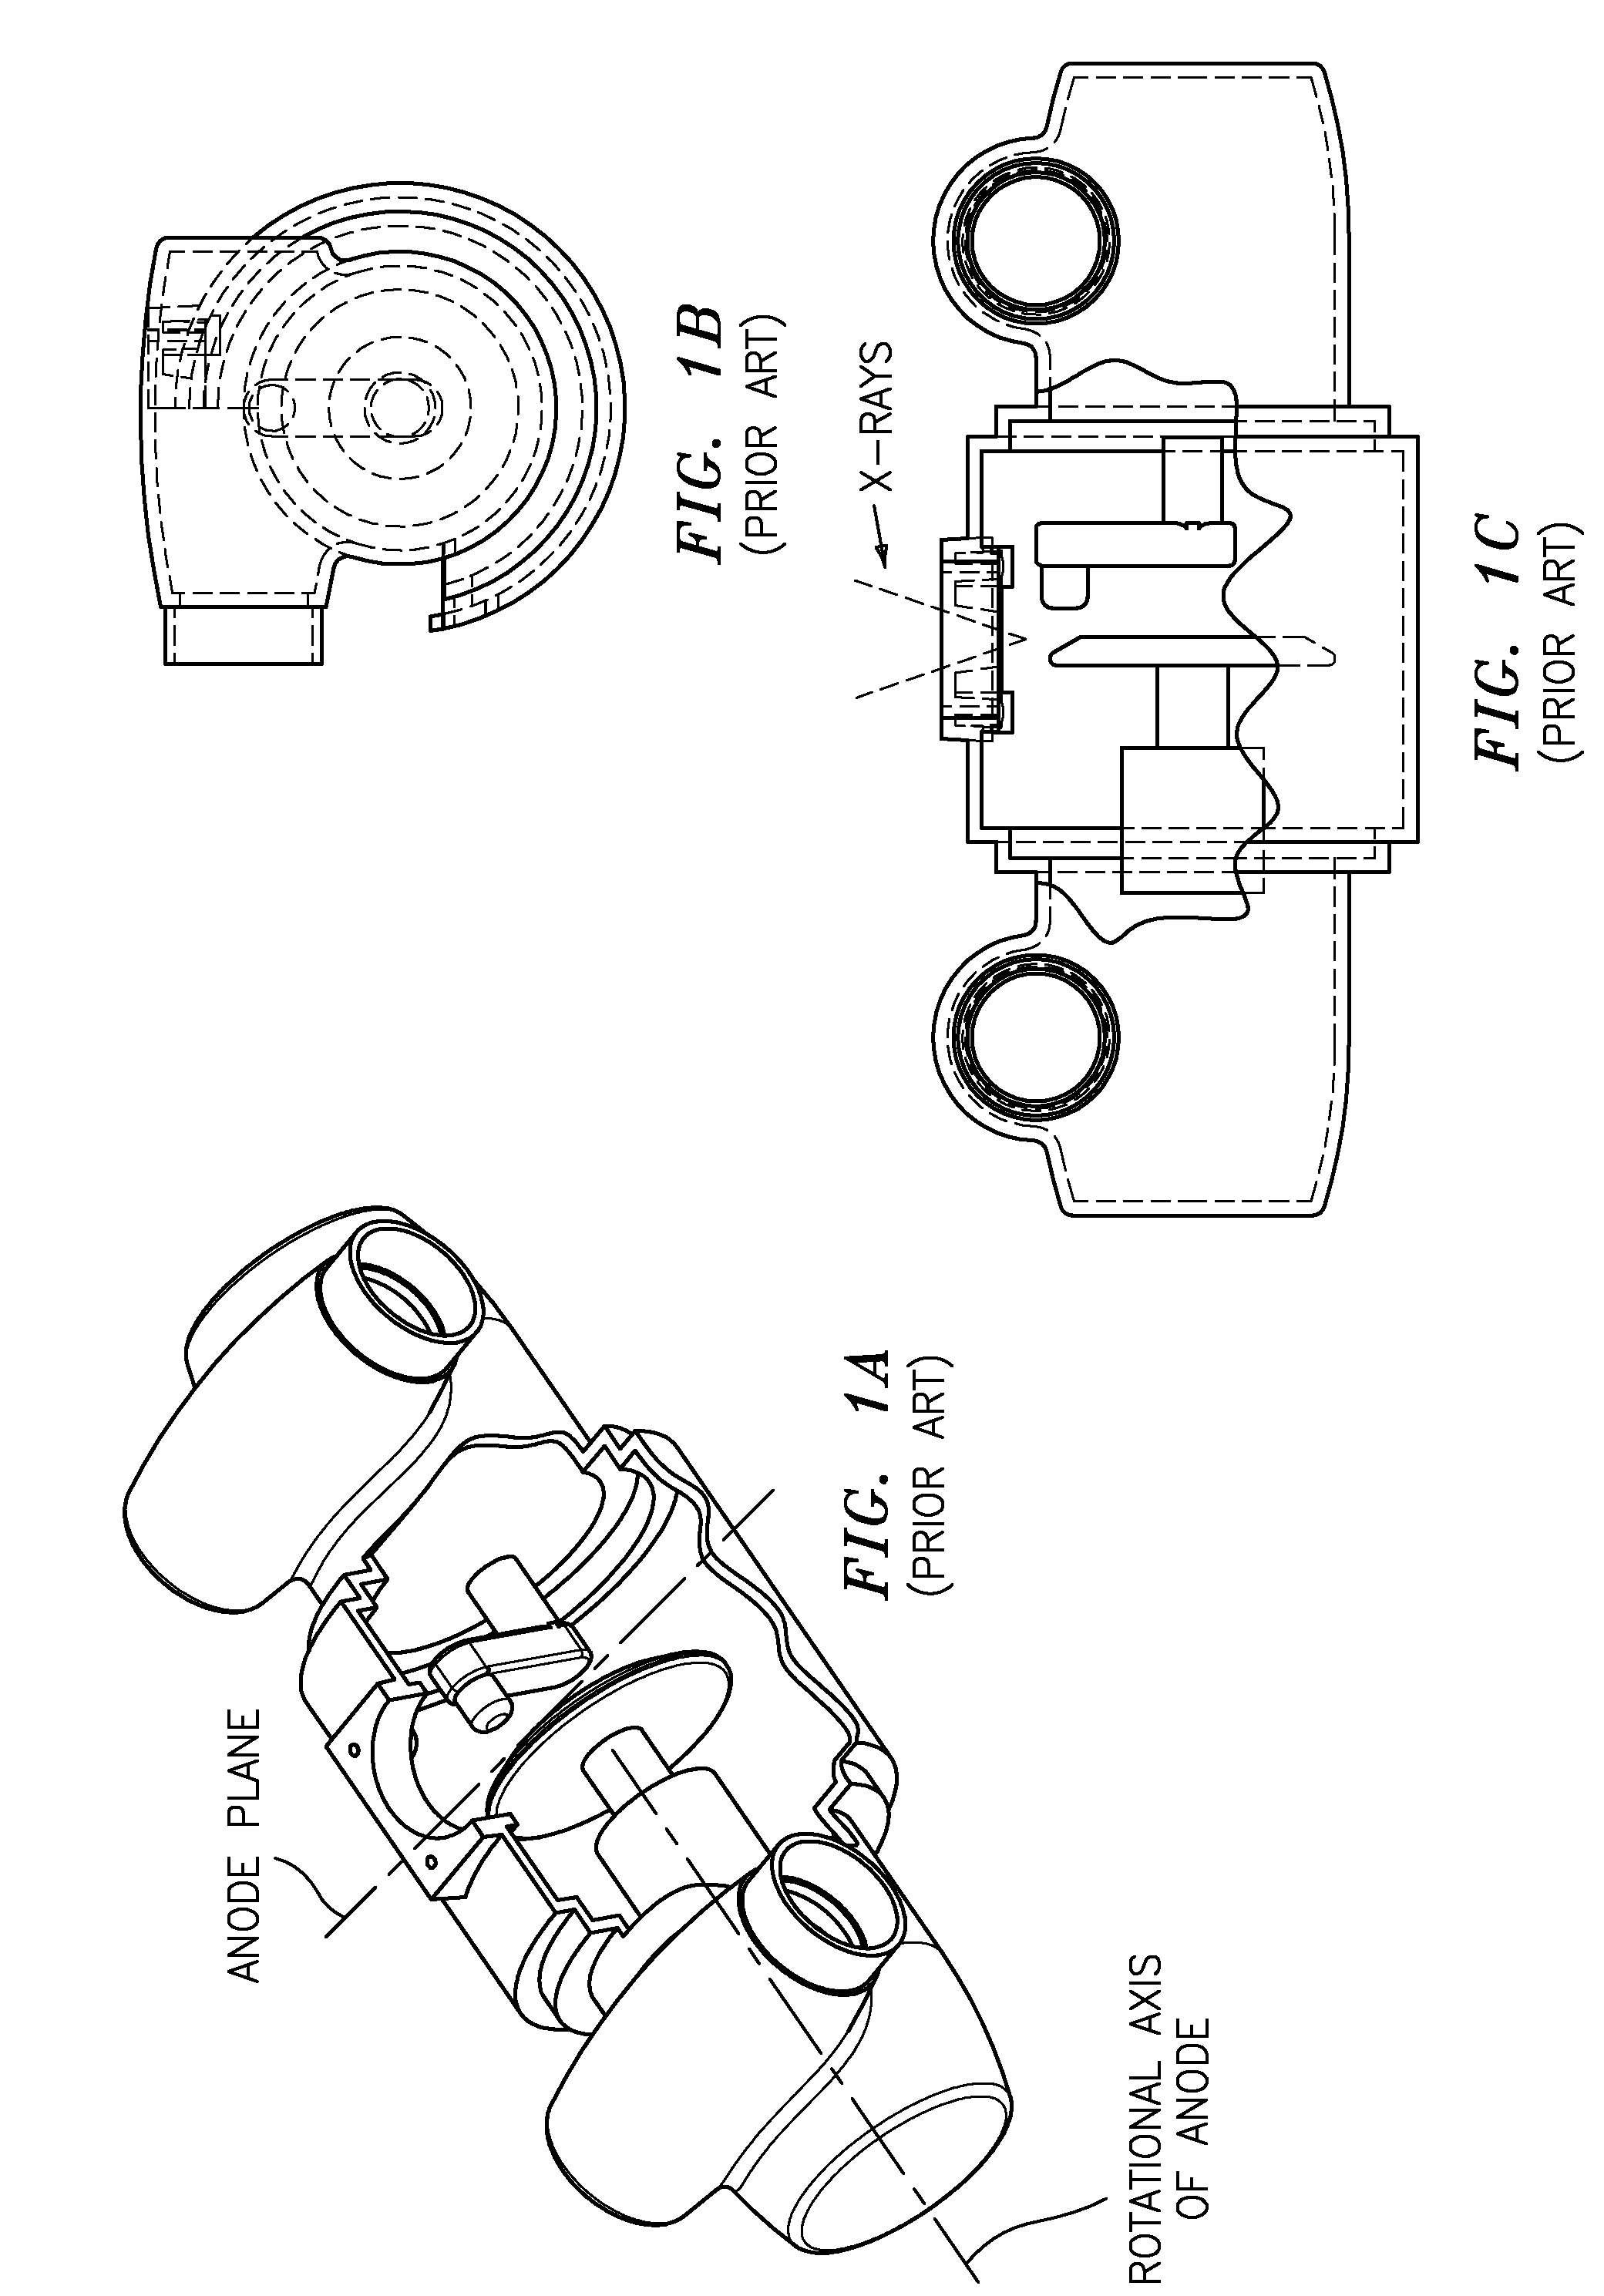 Grounded rotating anode x-ray tube housing